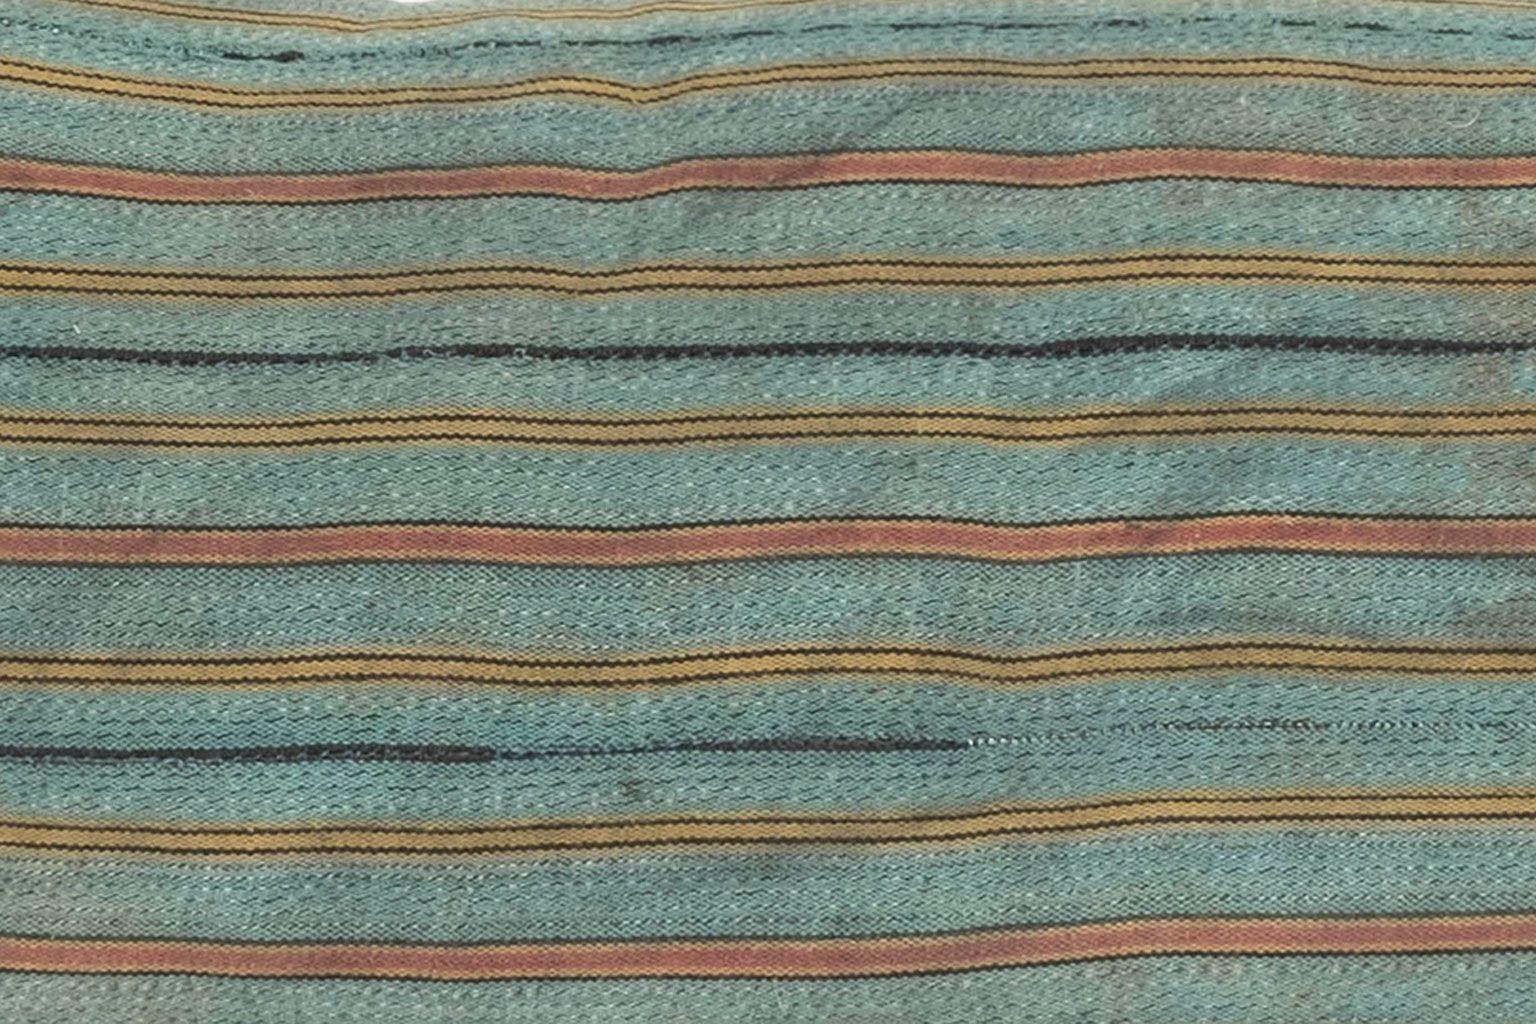 Large teal, gold, navy and coral striped lumbar cushion hand-sewn from a vintage cotton textile. Self-backed. This decorative pillow includes a zip fastener and feather insert. Two more large lumbar cushions are available in the same textile with